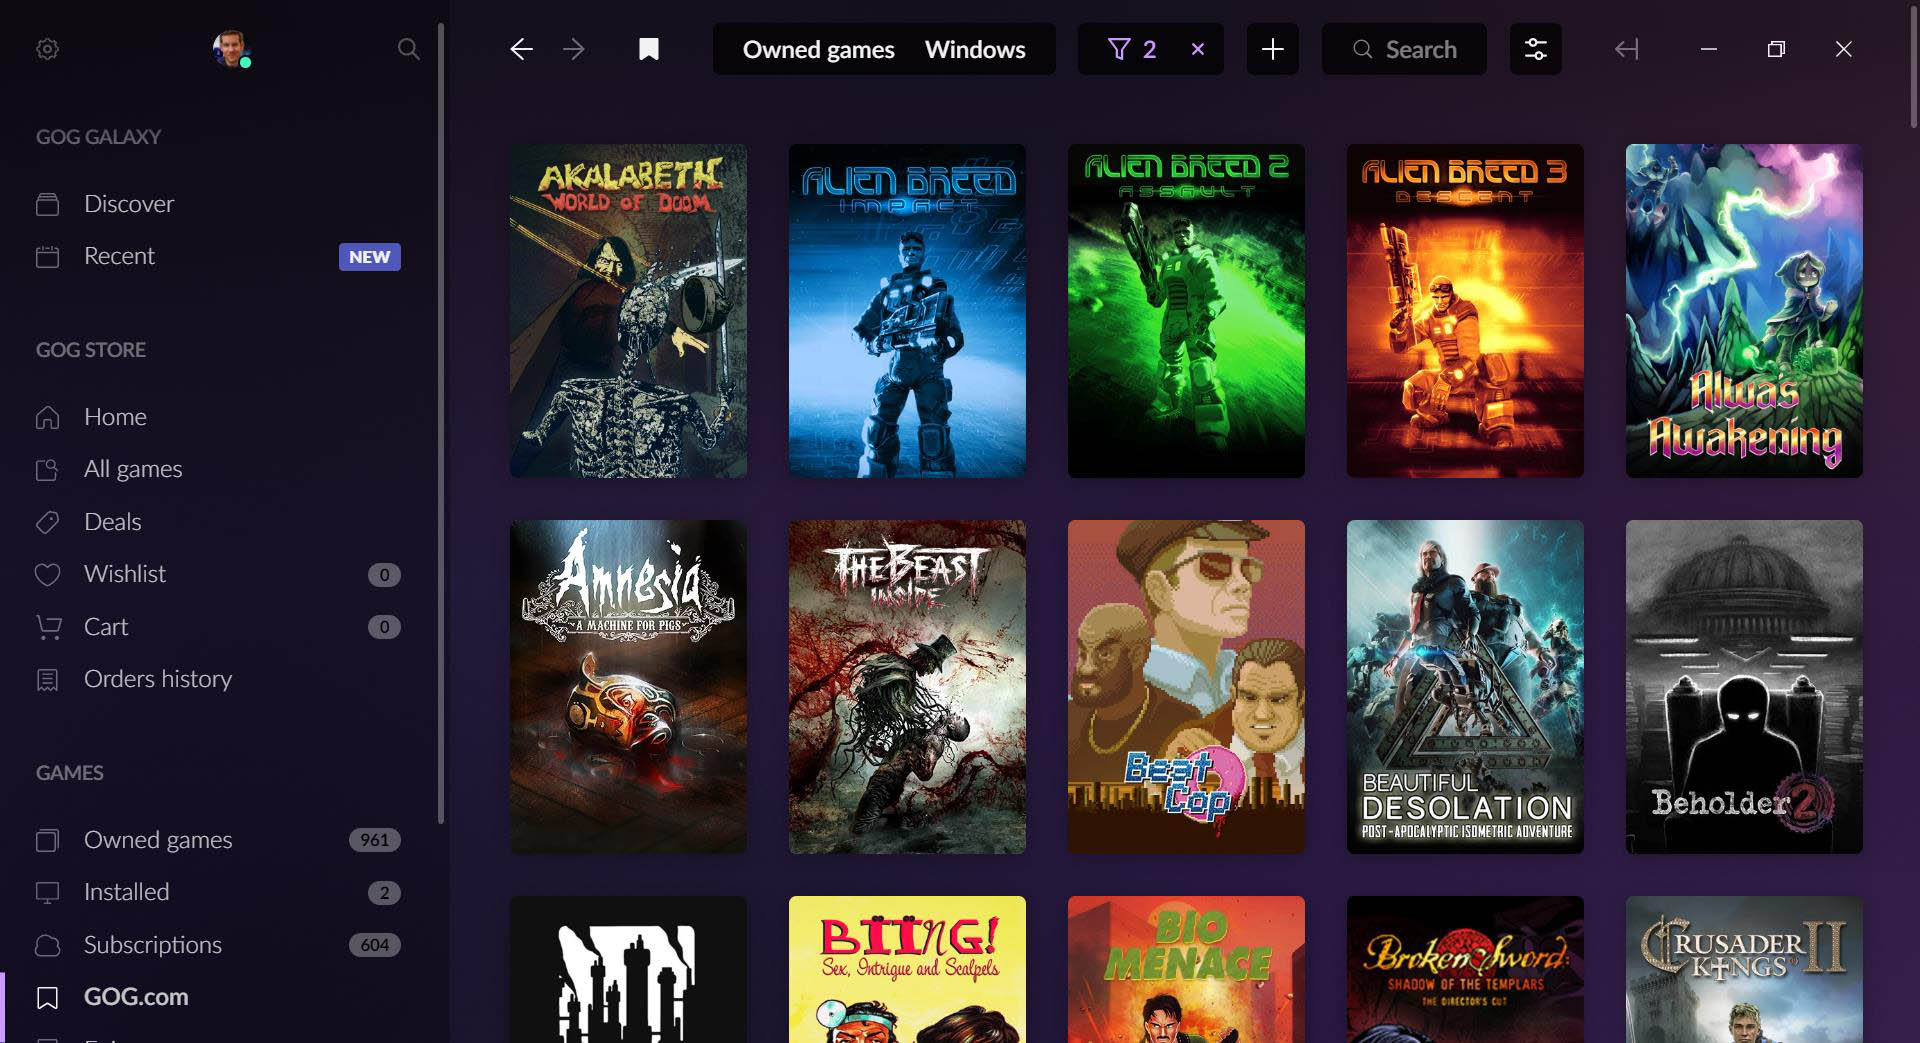 Can I play Fortnite without the Epic Launcher now? (GOG Closed